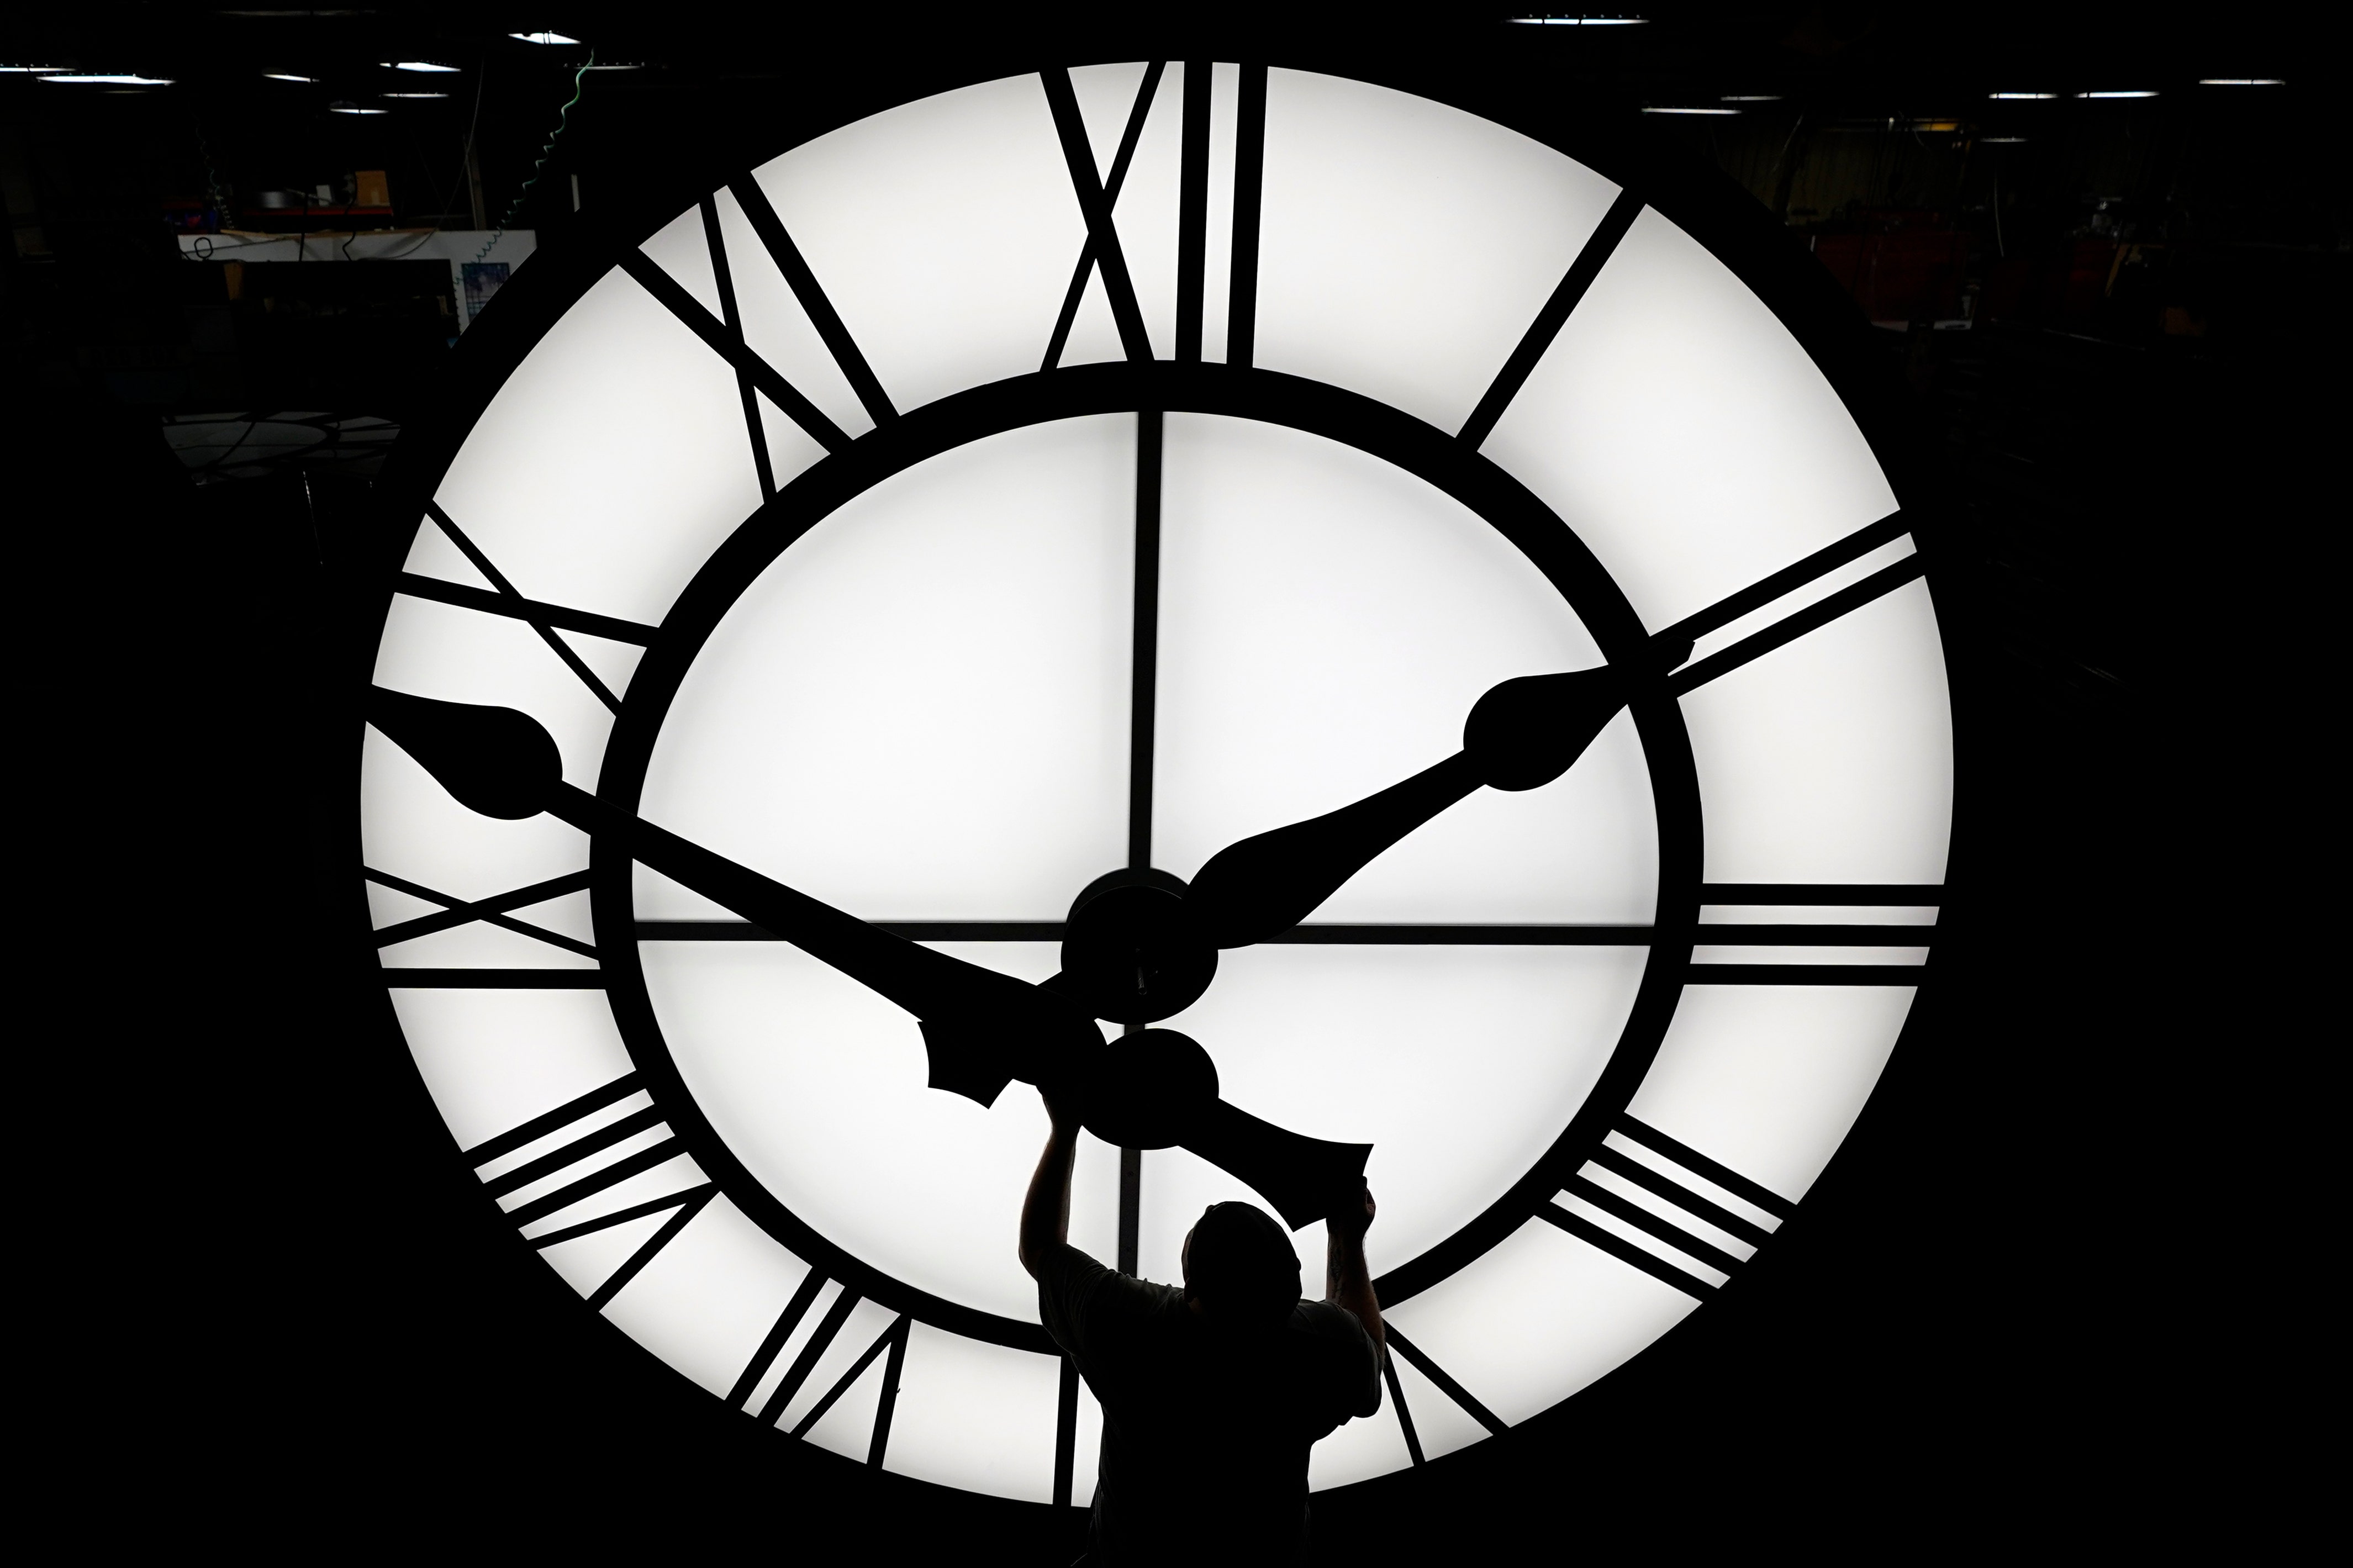 What is Daylight Saving Time and why does most of Arizona not observe it?